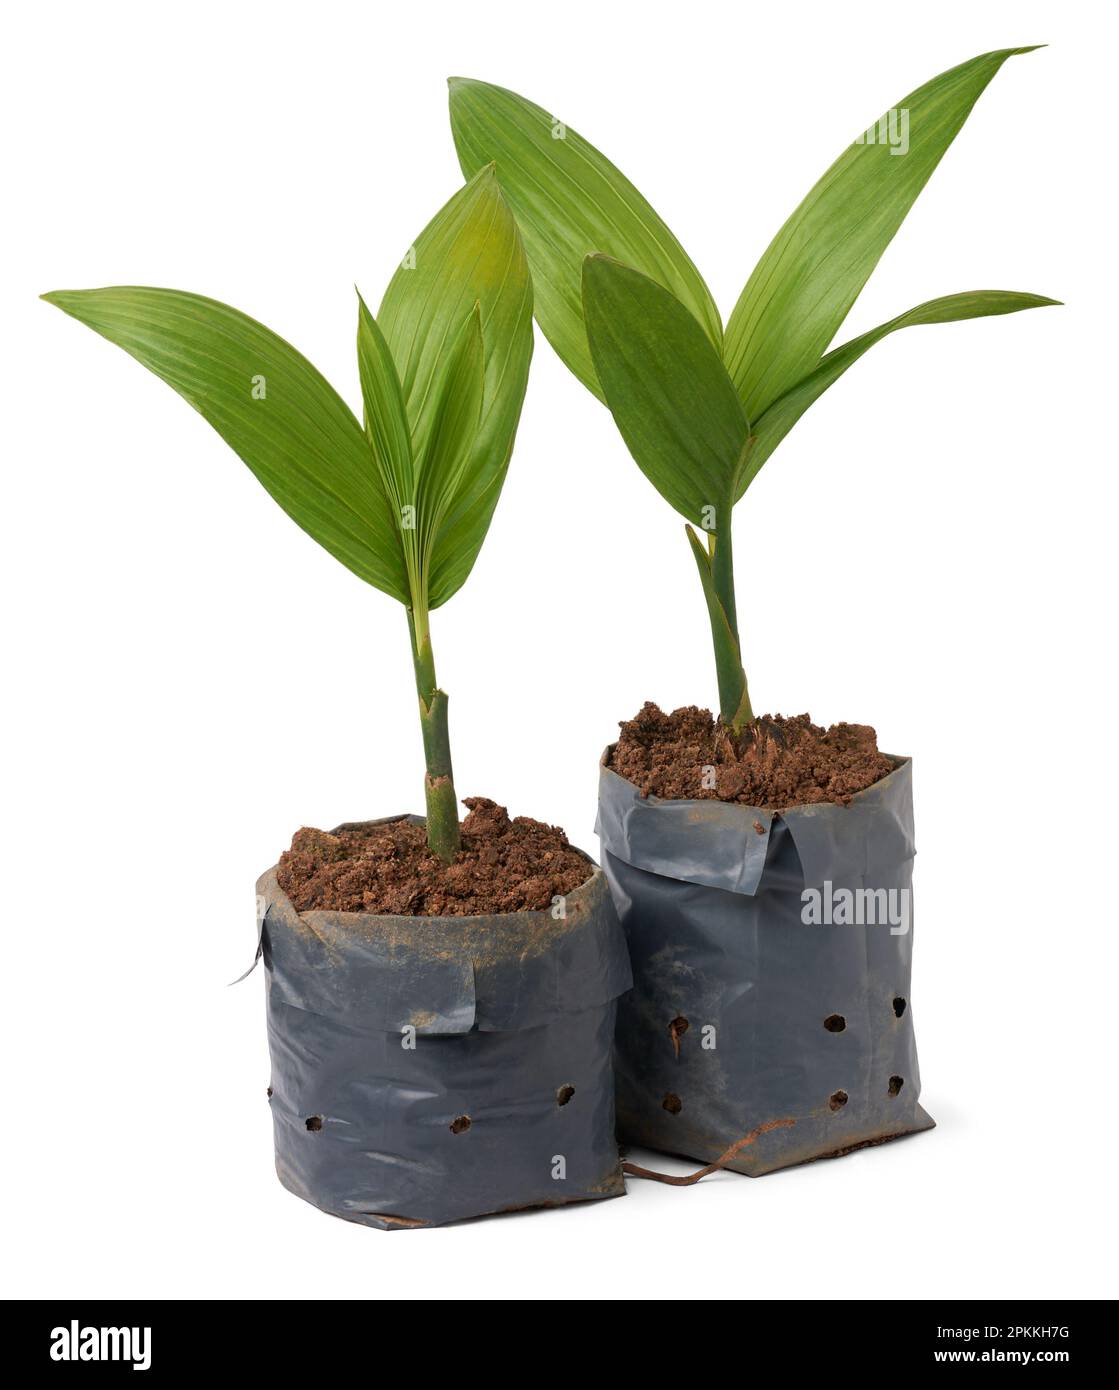 young areca nut plants, aka areca palm isolated in white background, areca nut palm, betel palm, betel nut palm or indian nut, tropical and commercial Stock Photo